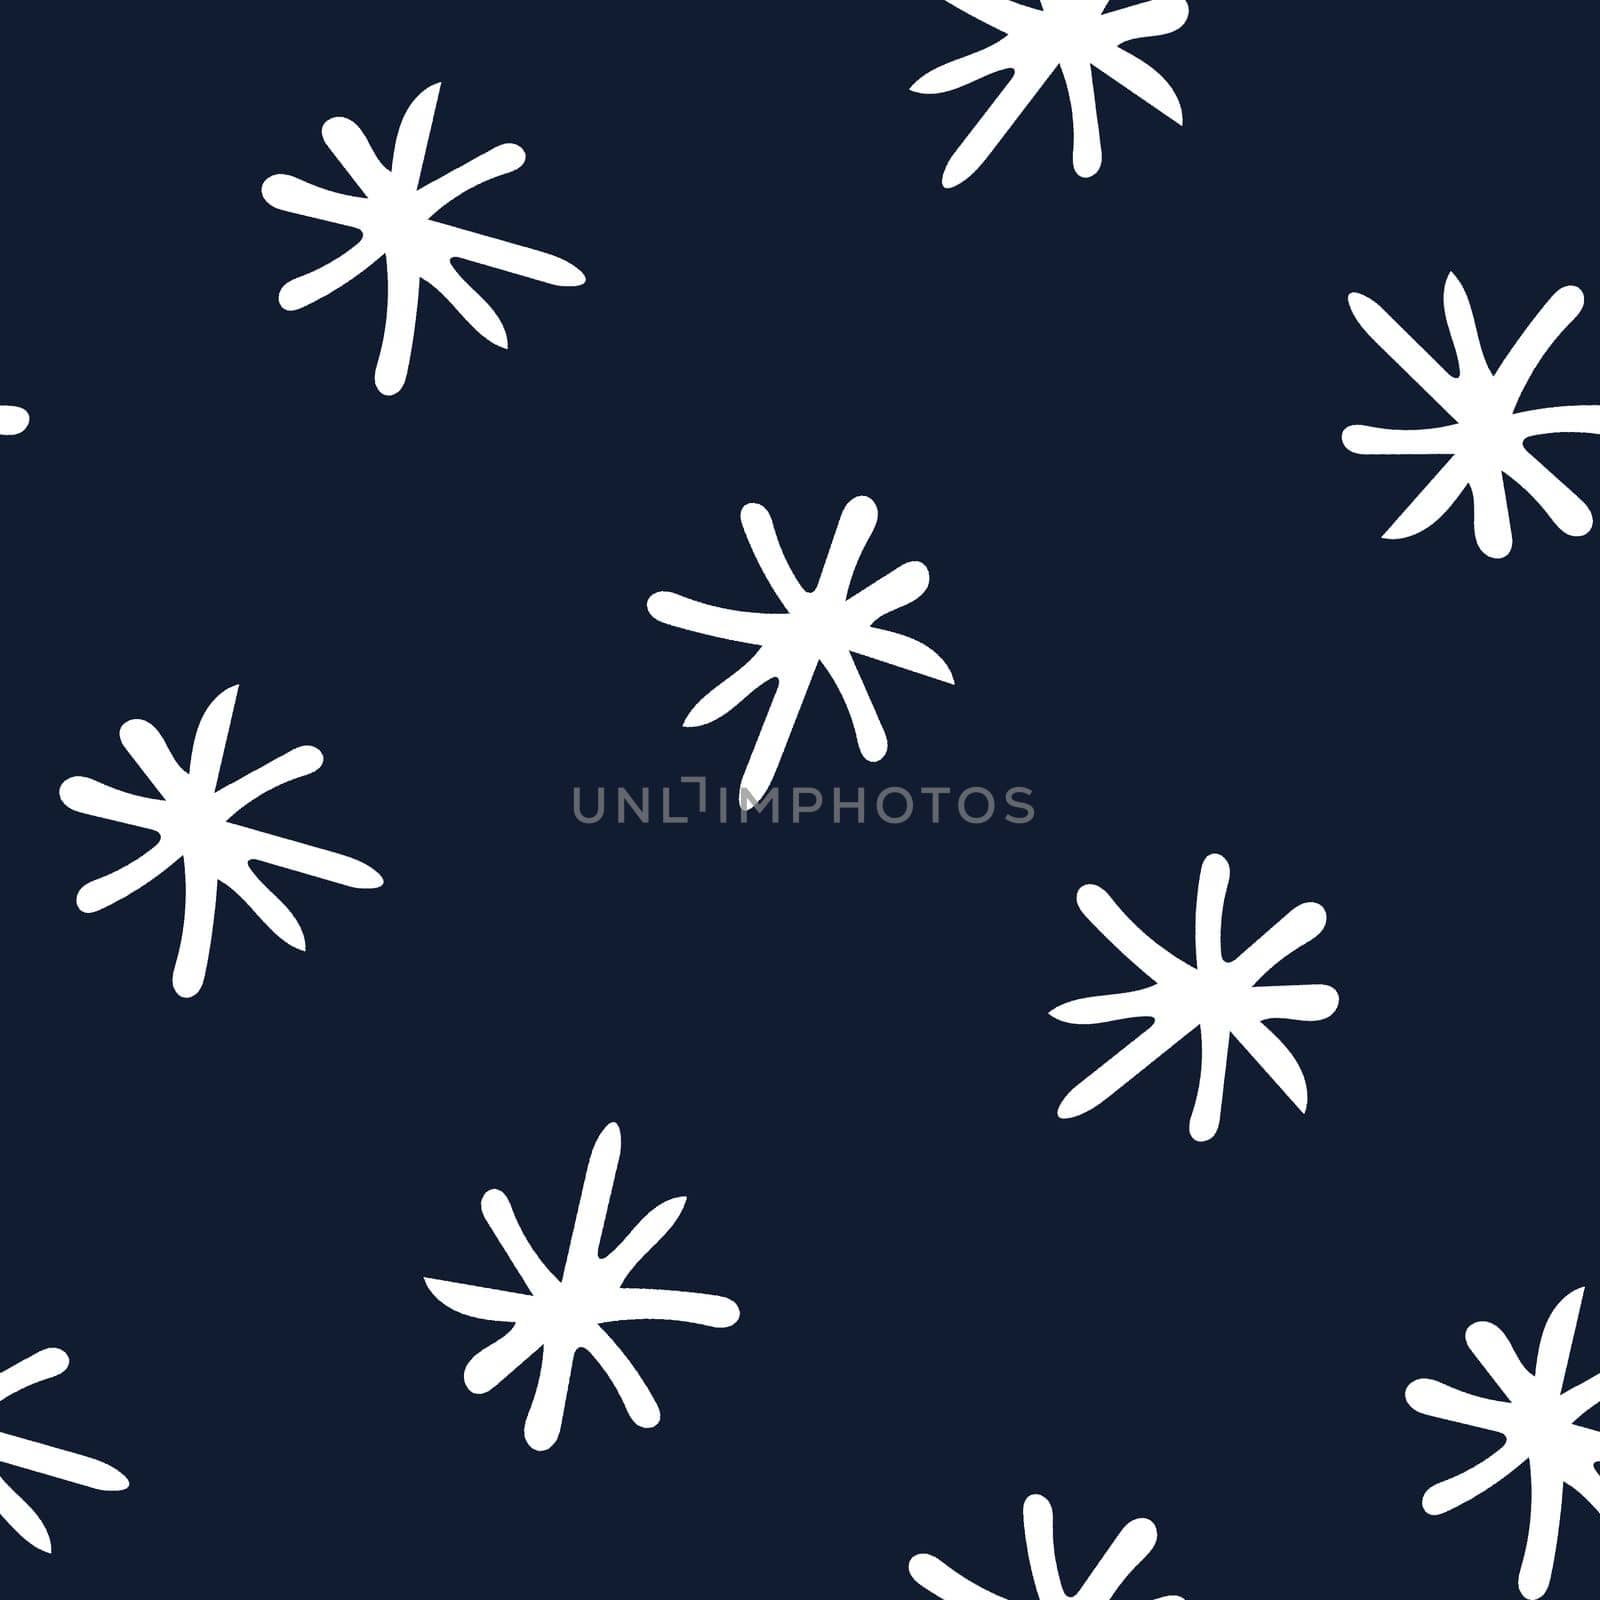 Seamless Pattern with White Snowflakes on Dark Blue Background. Abstract Hand-Drawn Doodle Snowflakes.